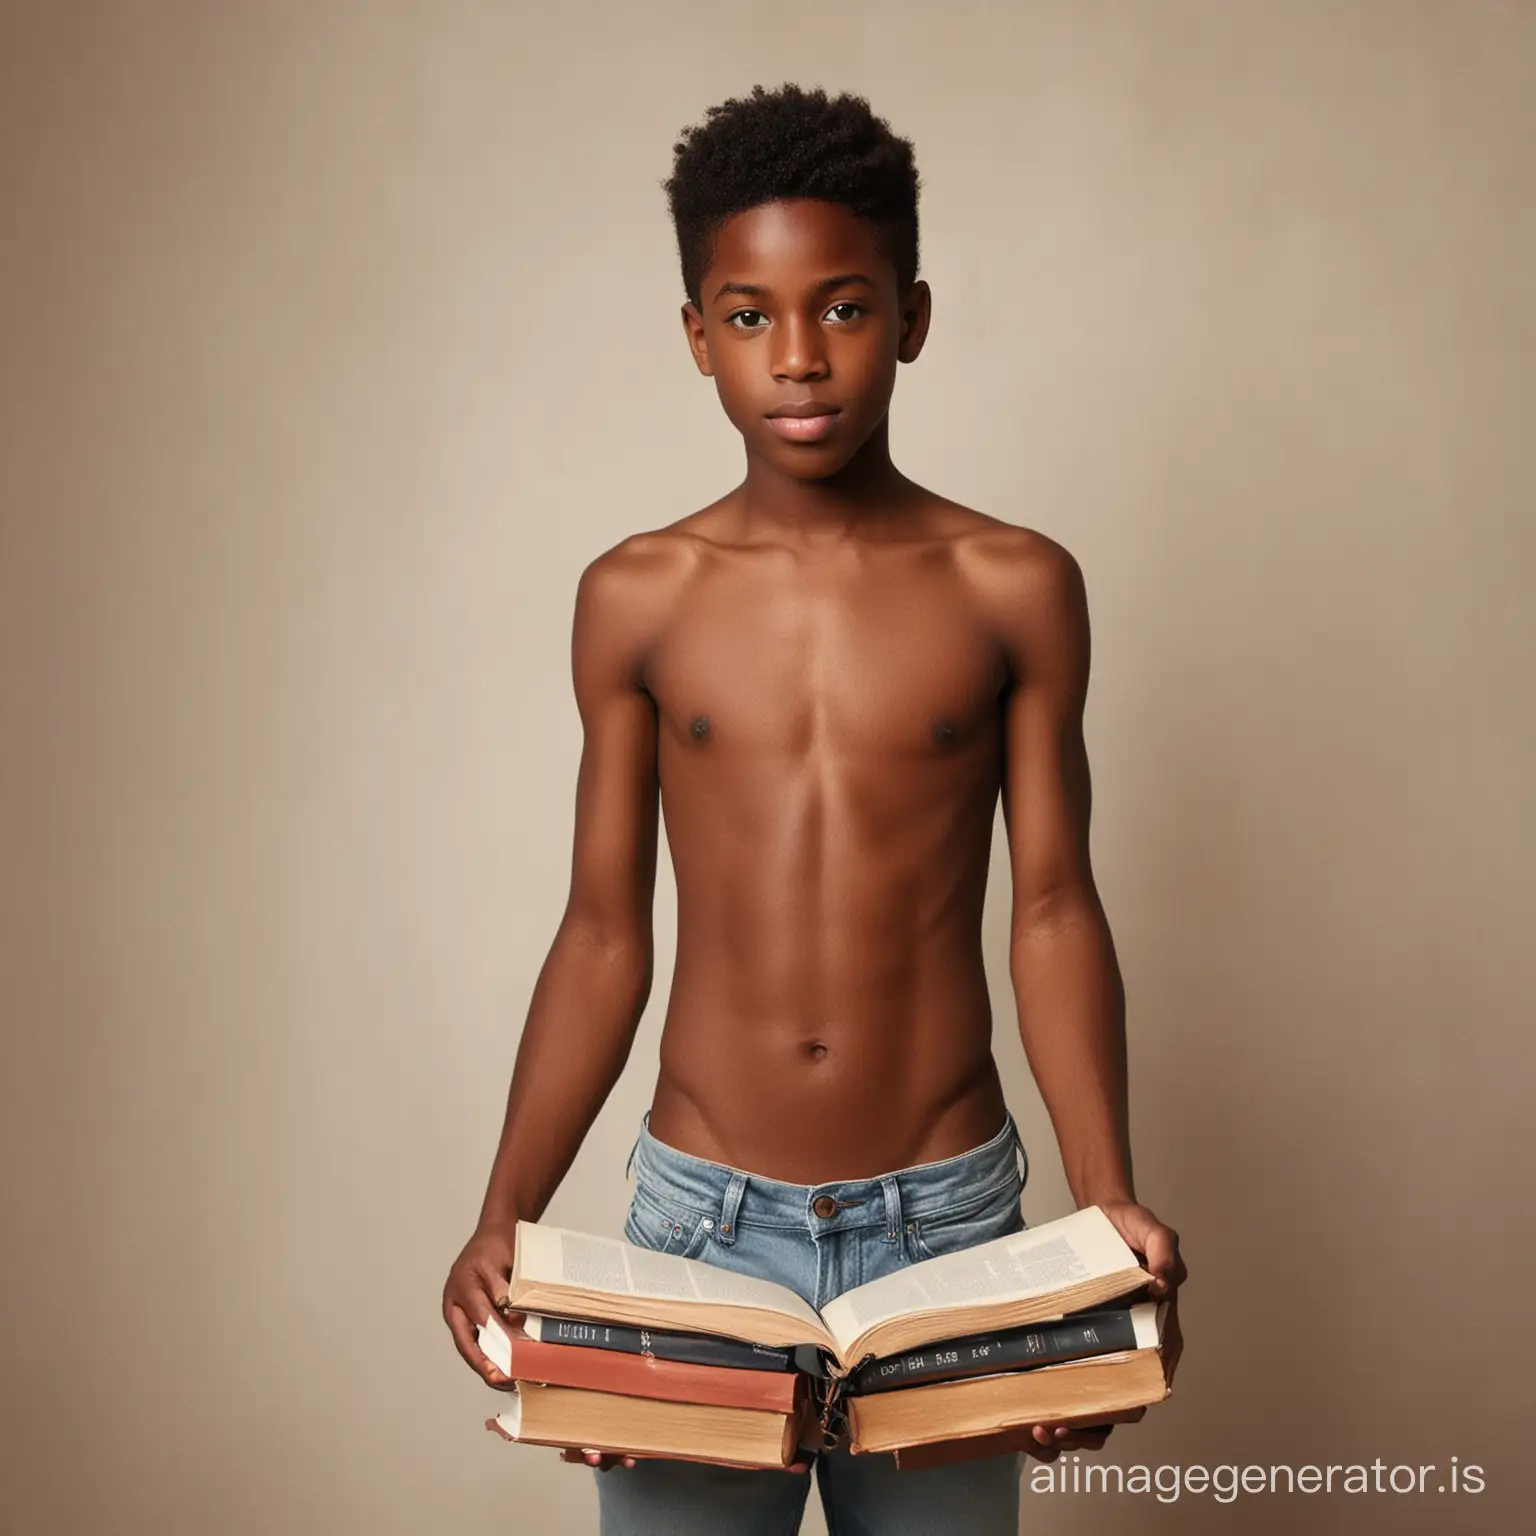 Young-African-American-Boy-with-Books-Shirtless-Reading-Adventure